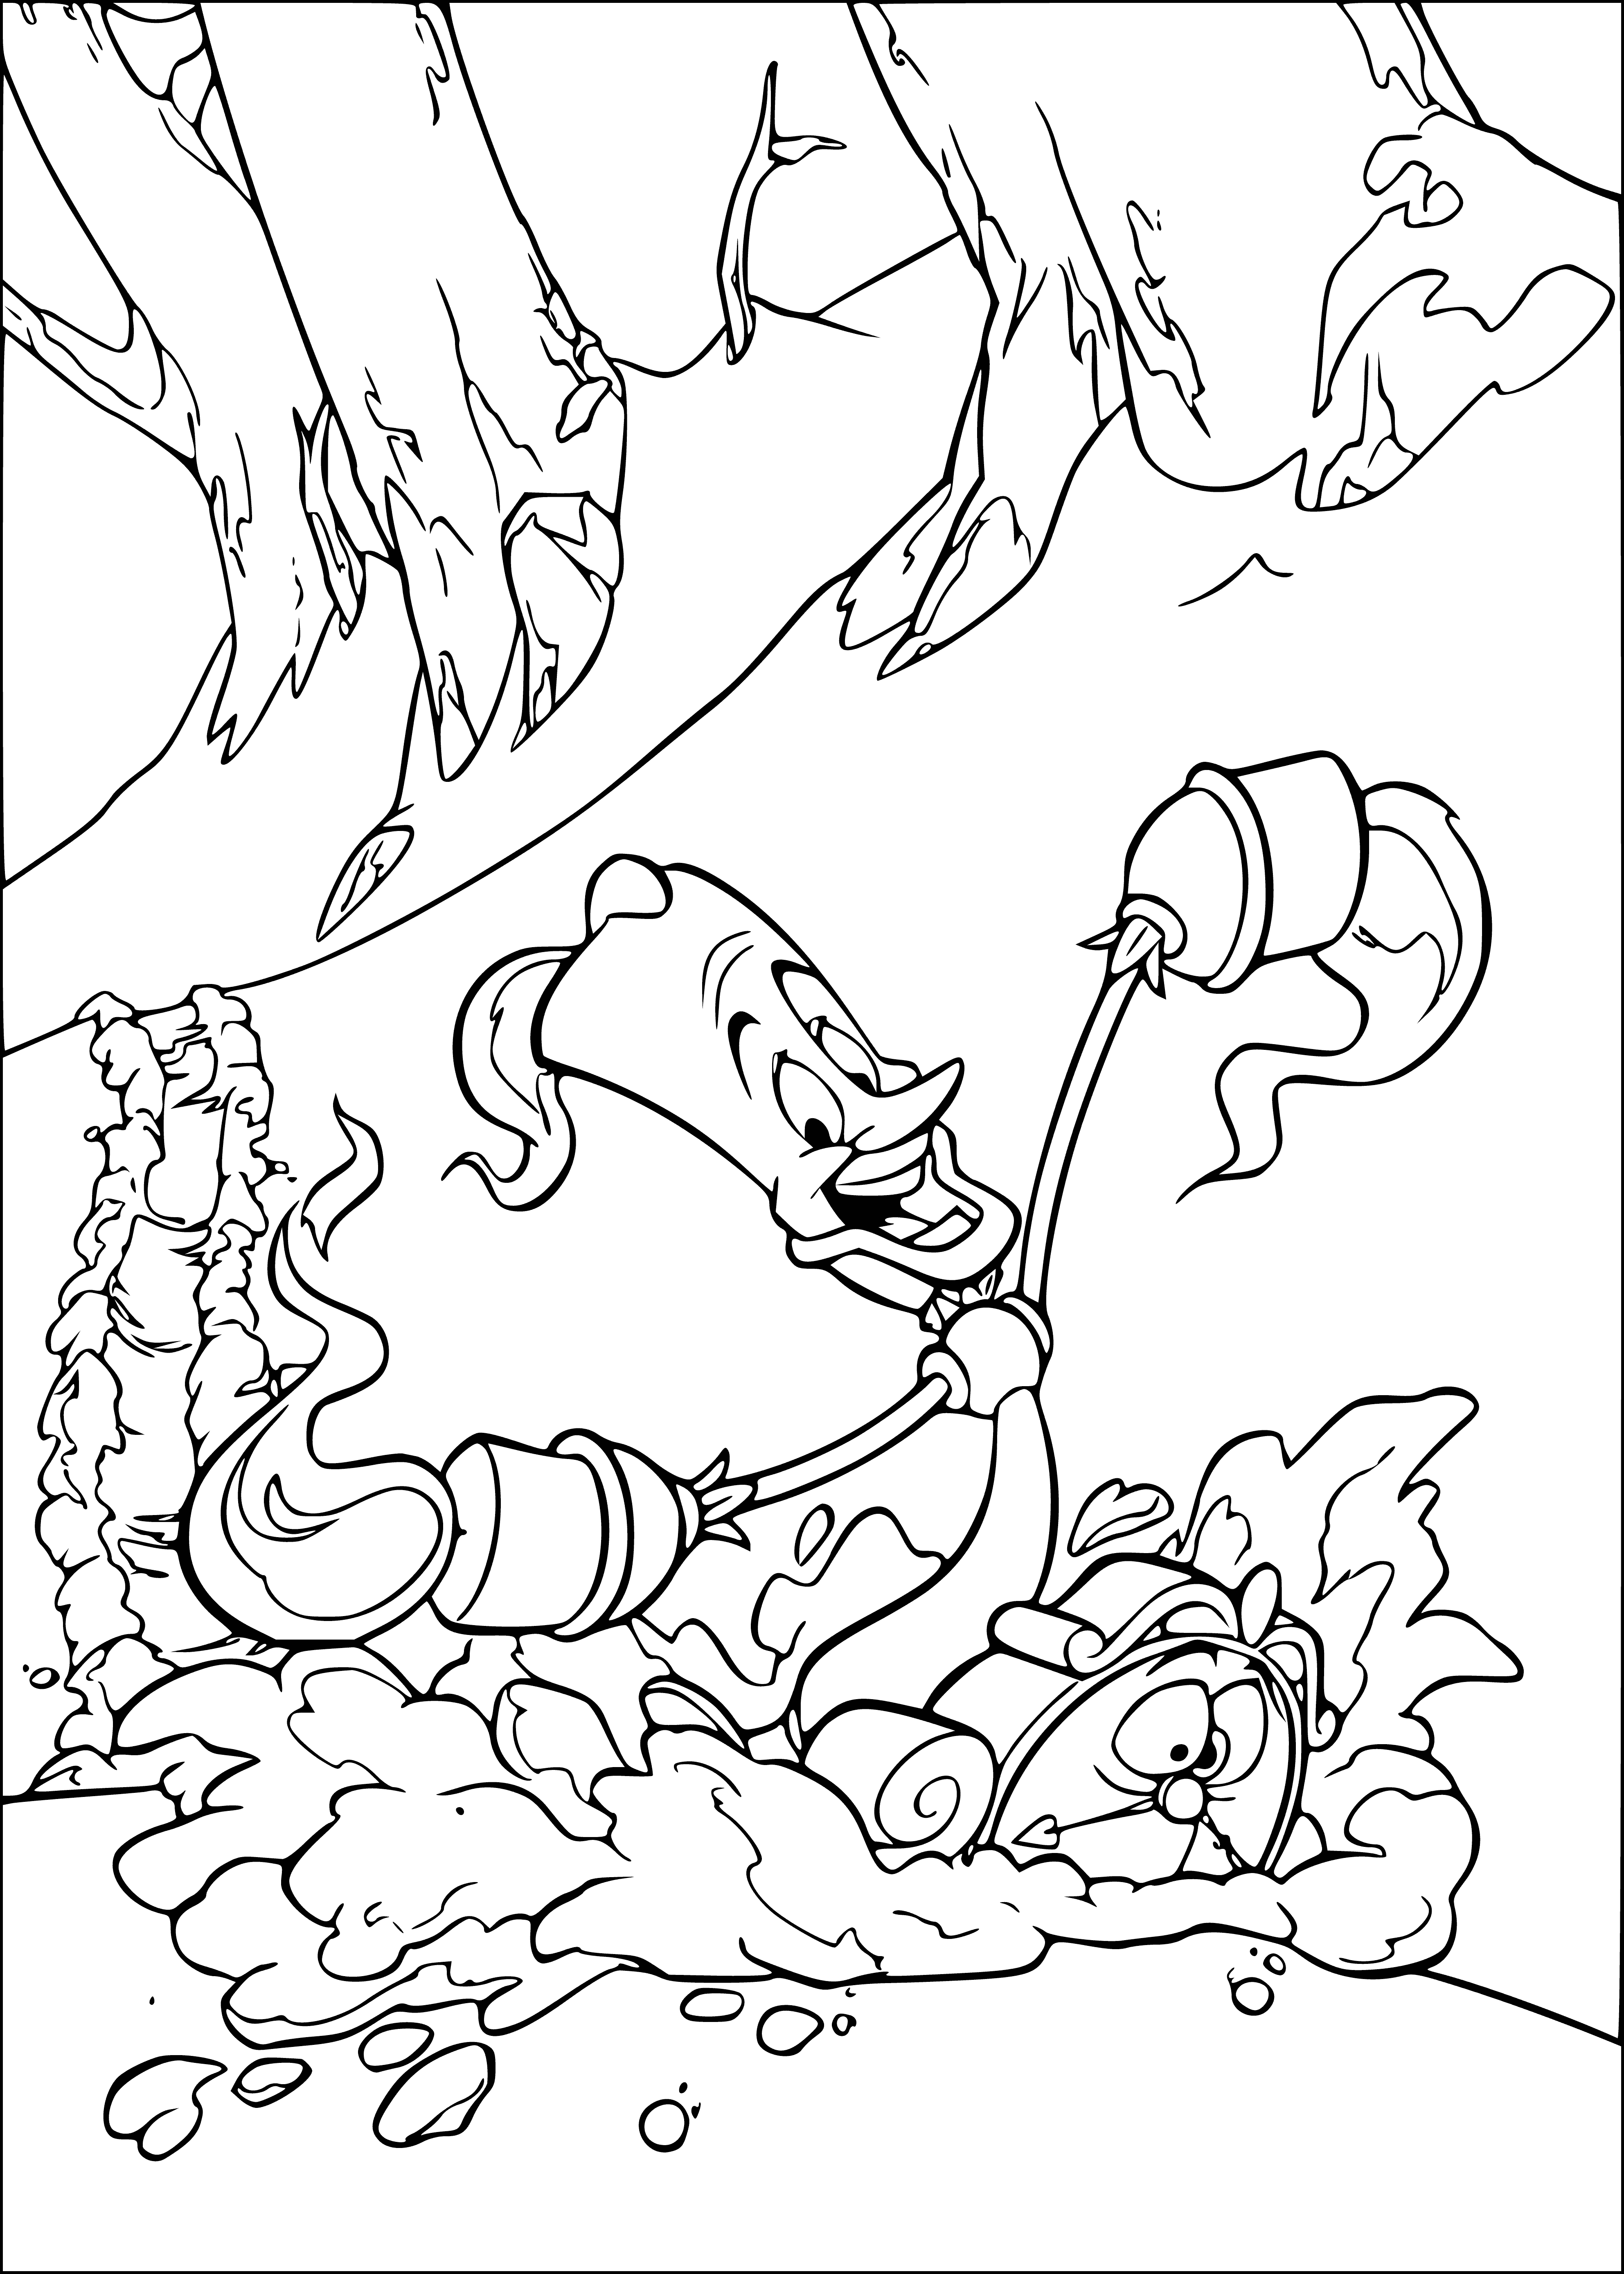 Downhill coloring page